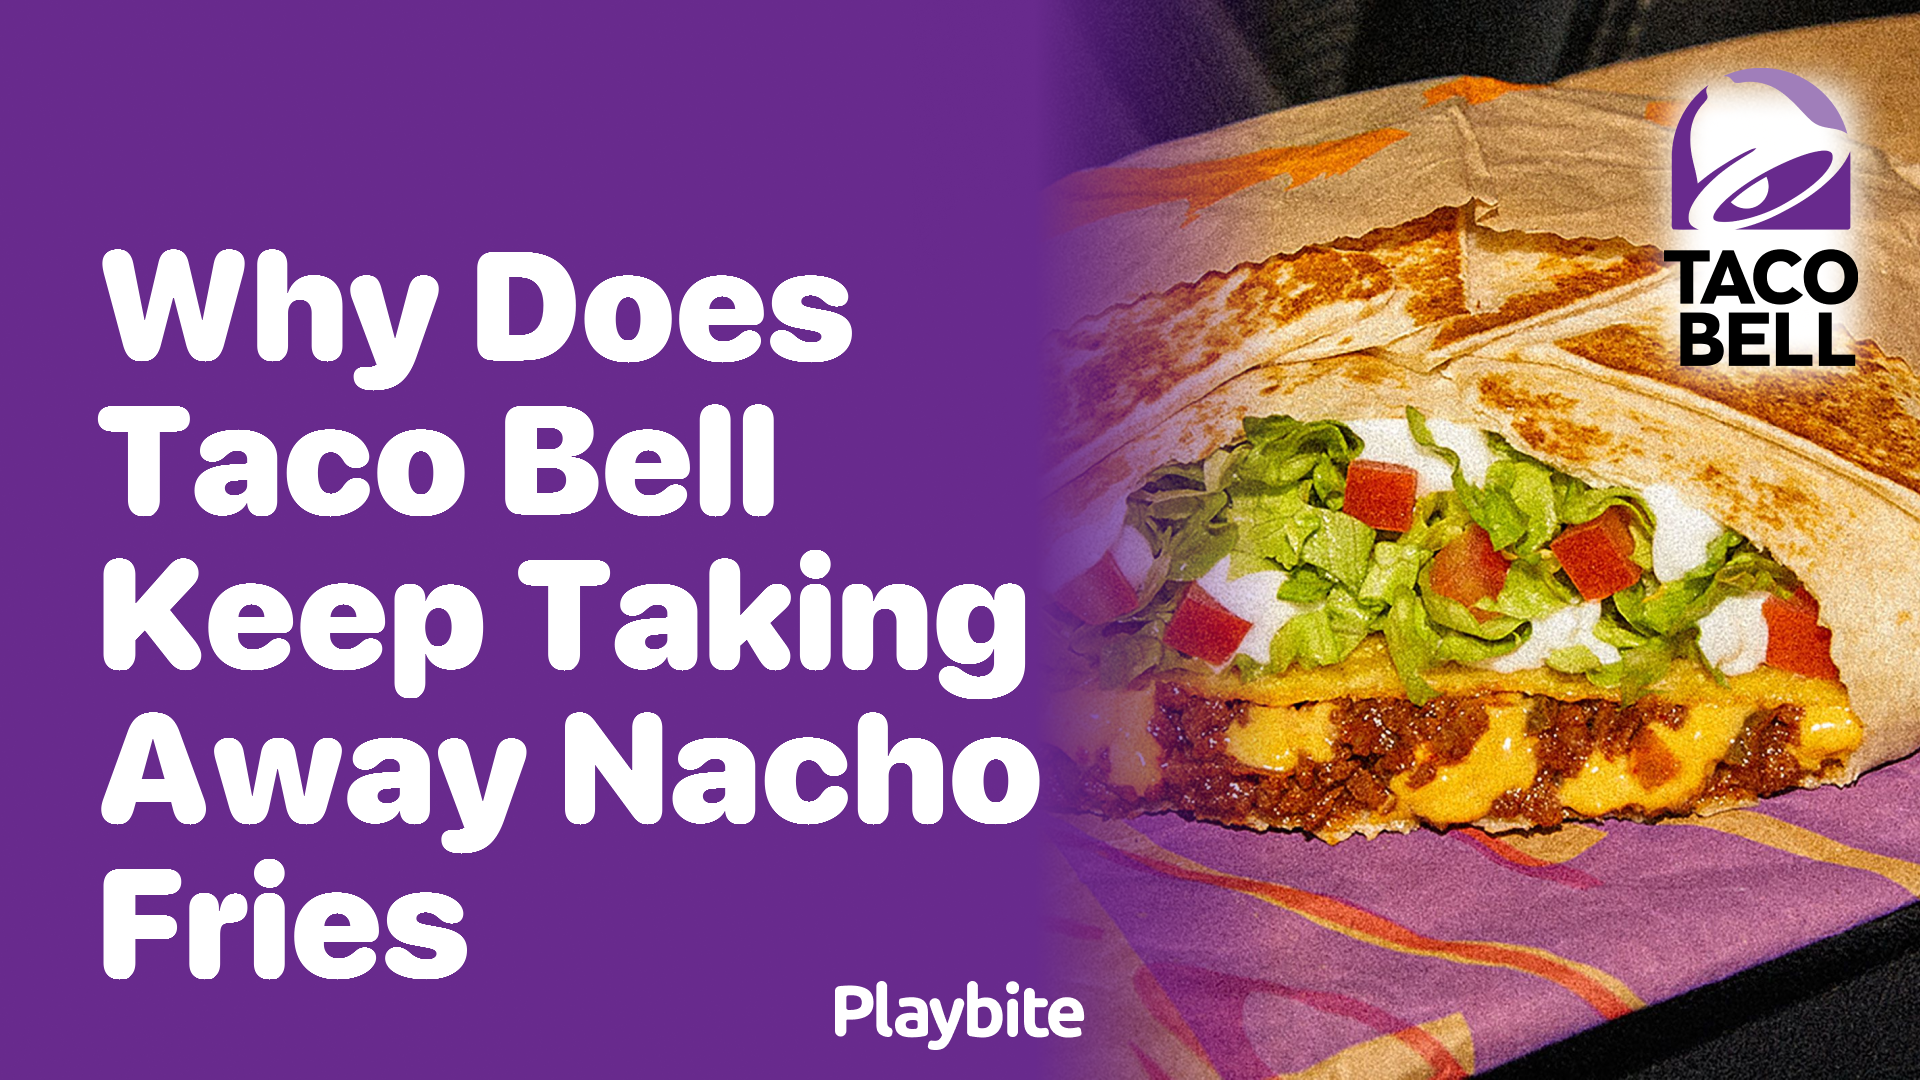 Why Does Taco Bell Keep Taking Away Nacho Fries?